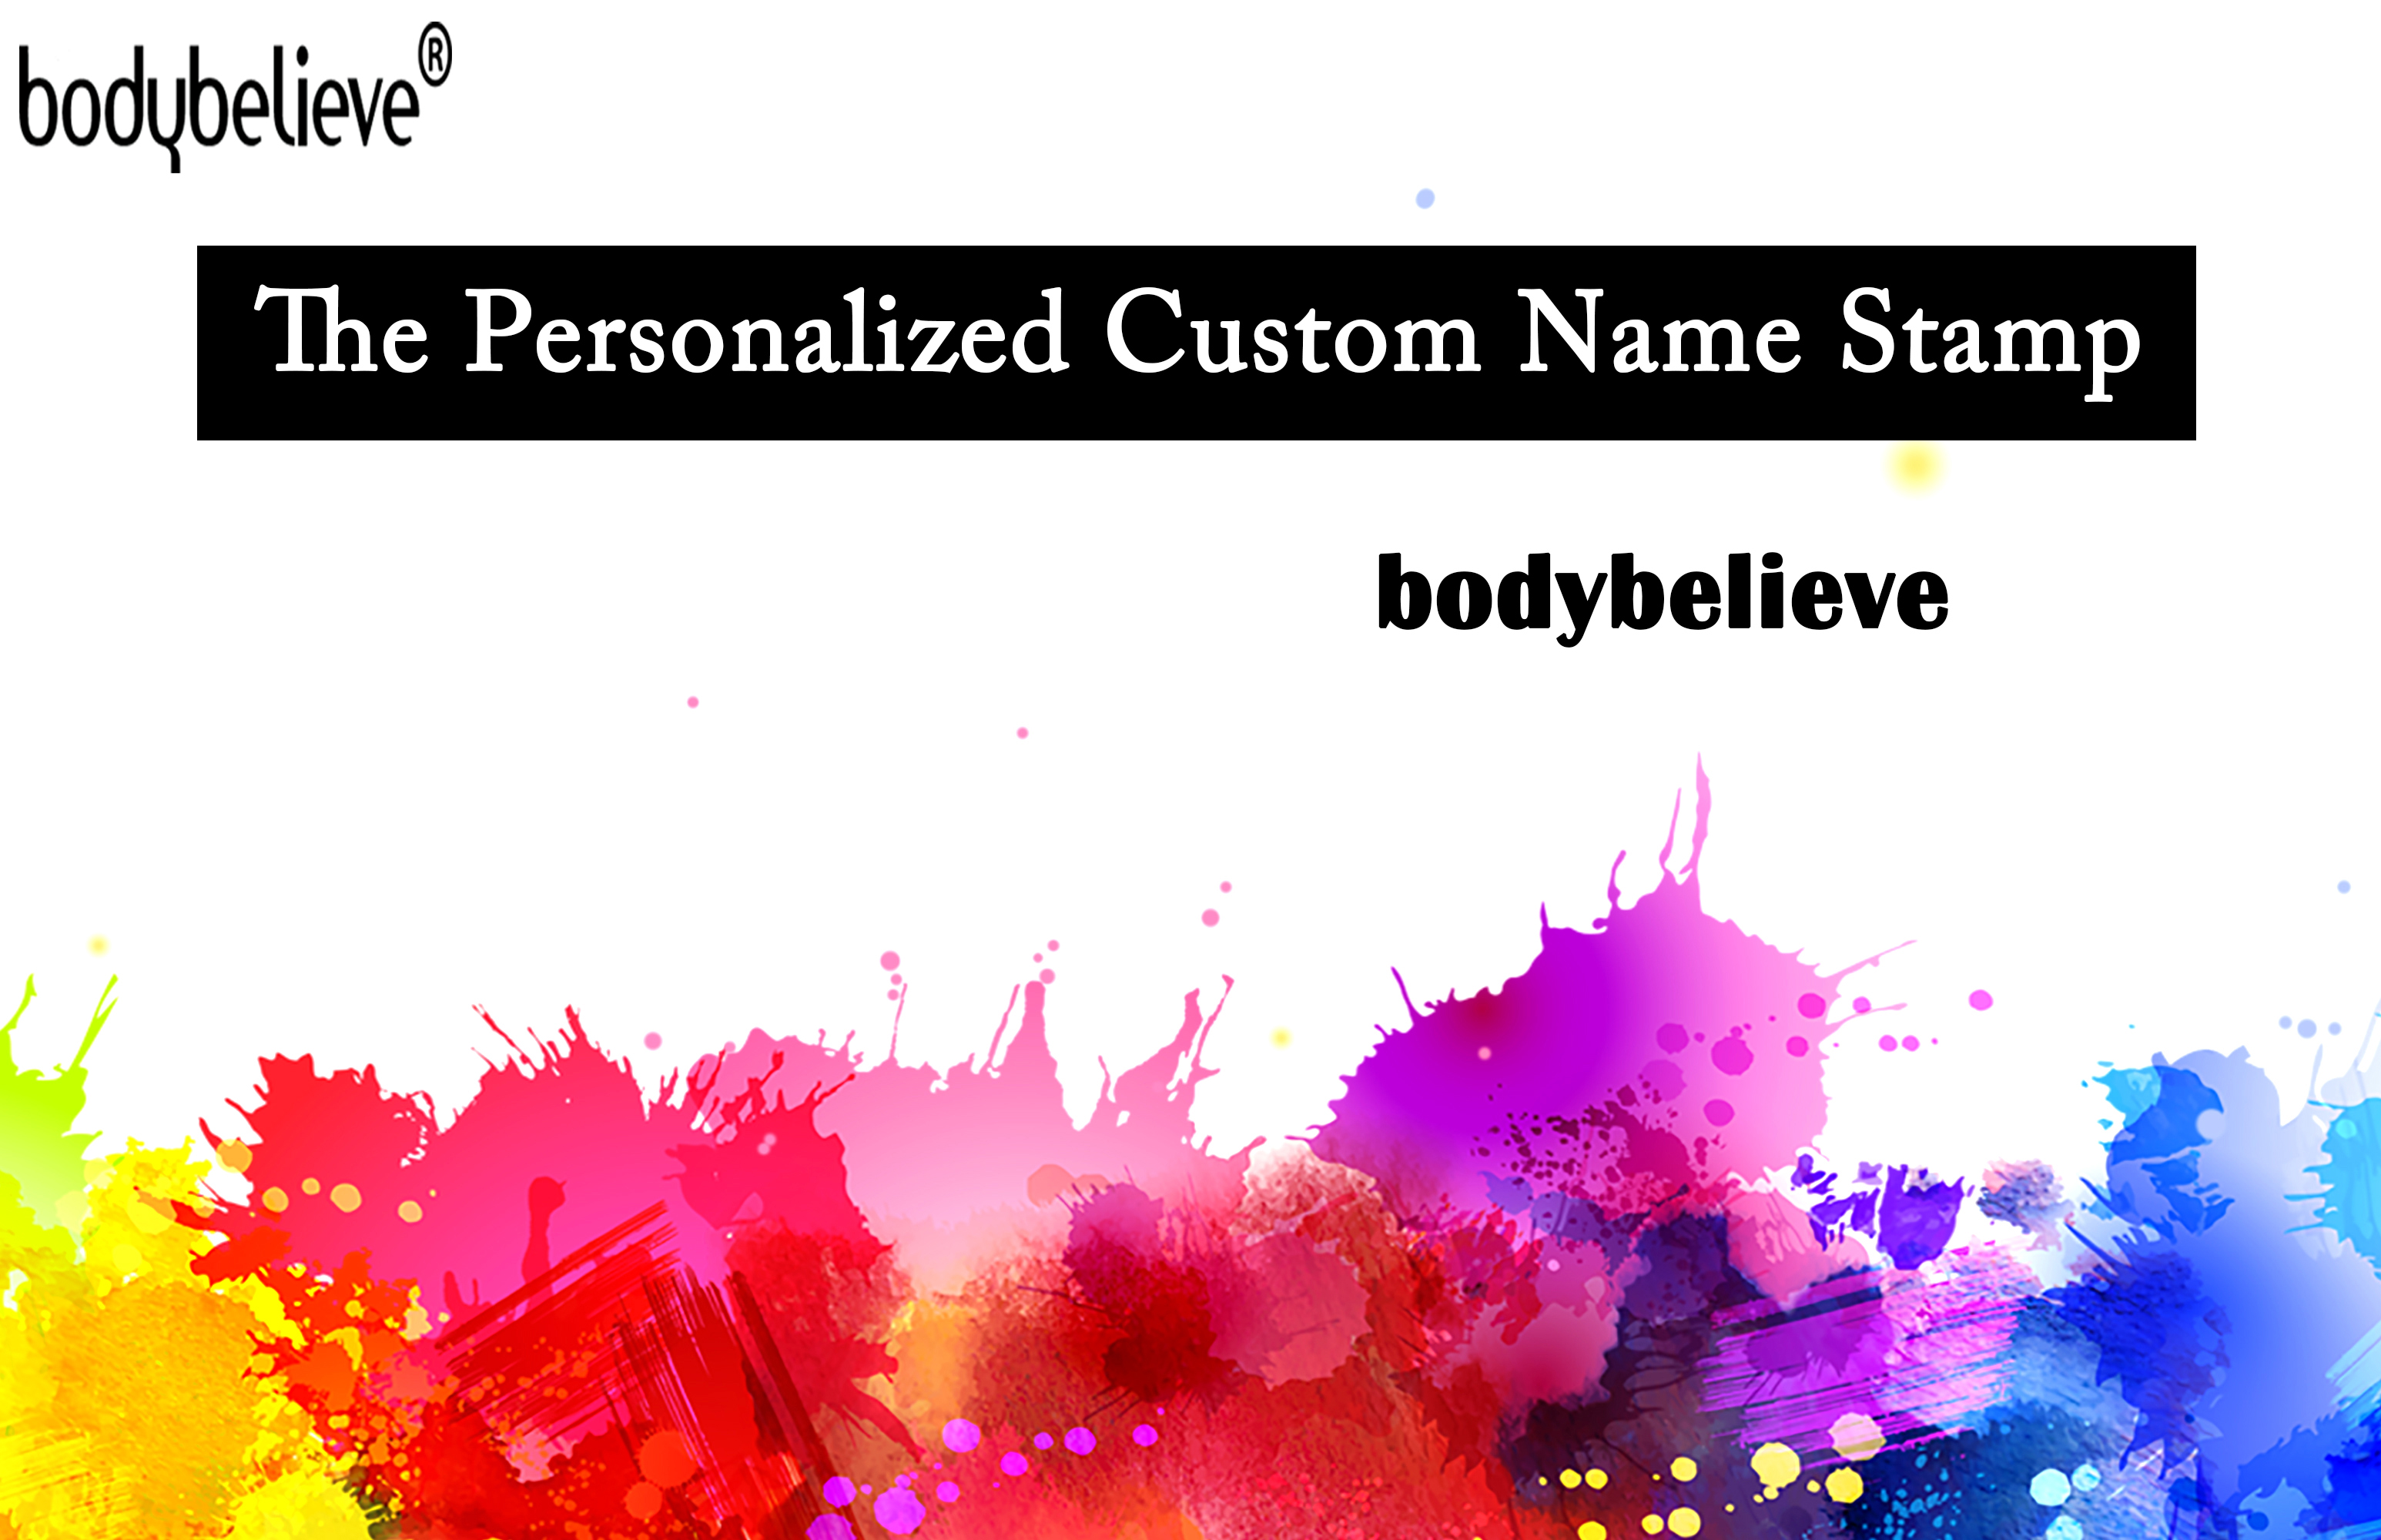  bodybelieve Name Stamp for Clothing Kids, Customized